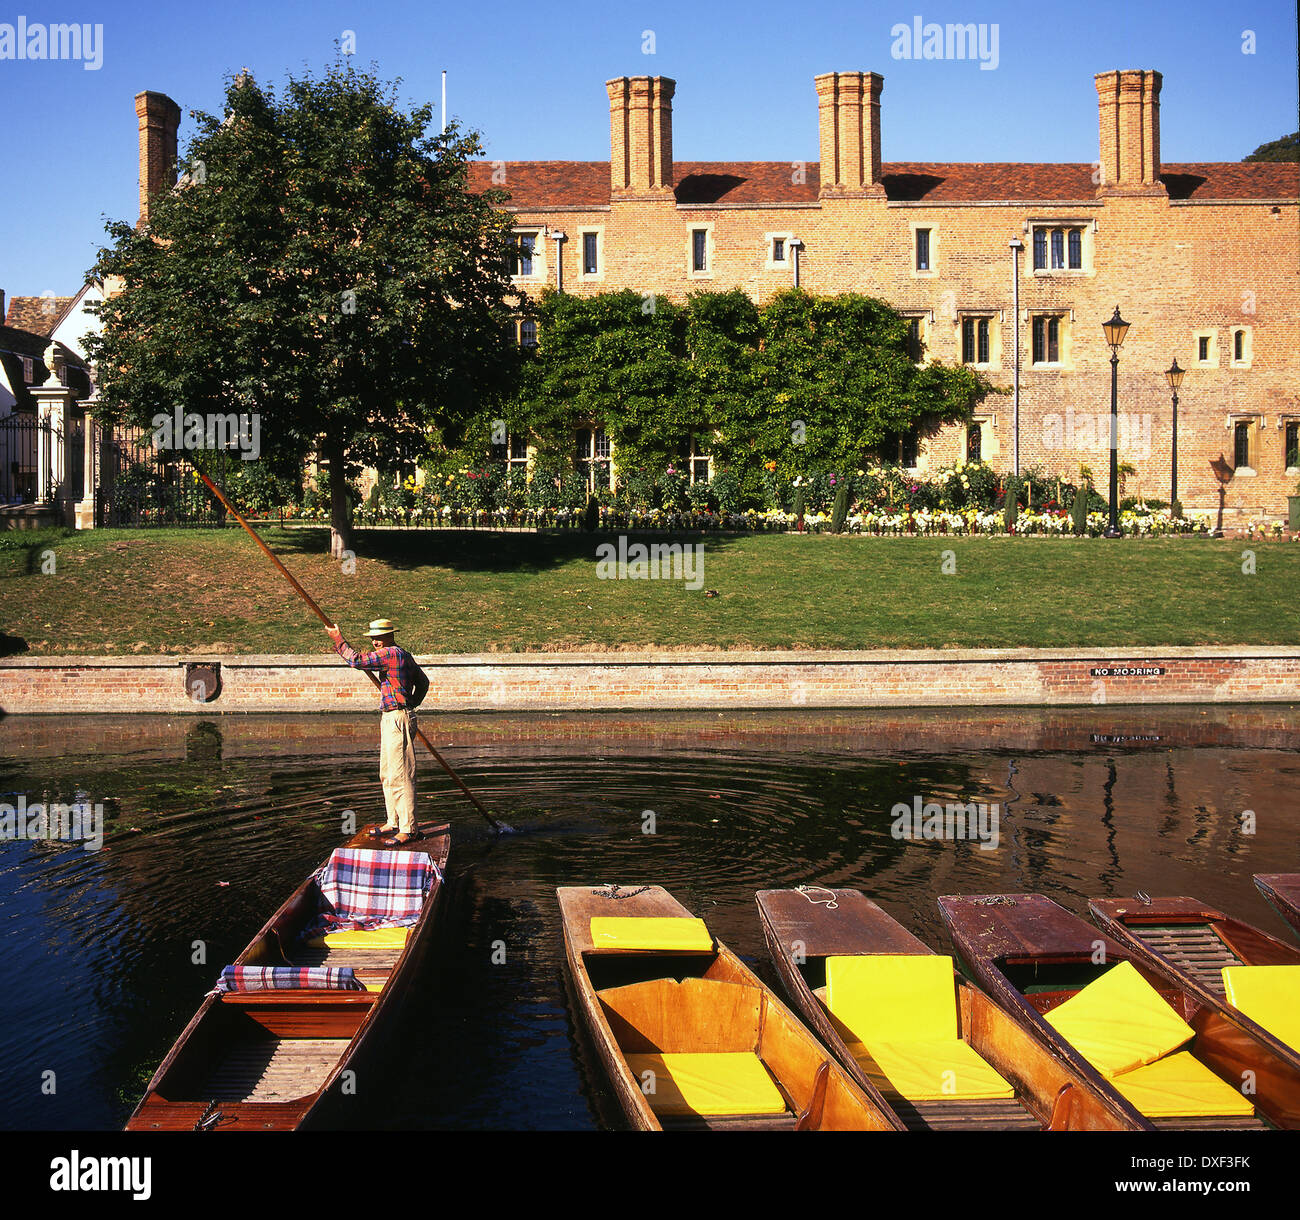 A STUDENT OARS A PUNT ON THE RIVER CAM IN CAMBRIDGE,CAMBRIDGESHIRE,ENGLAND Stock Photo